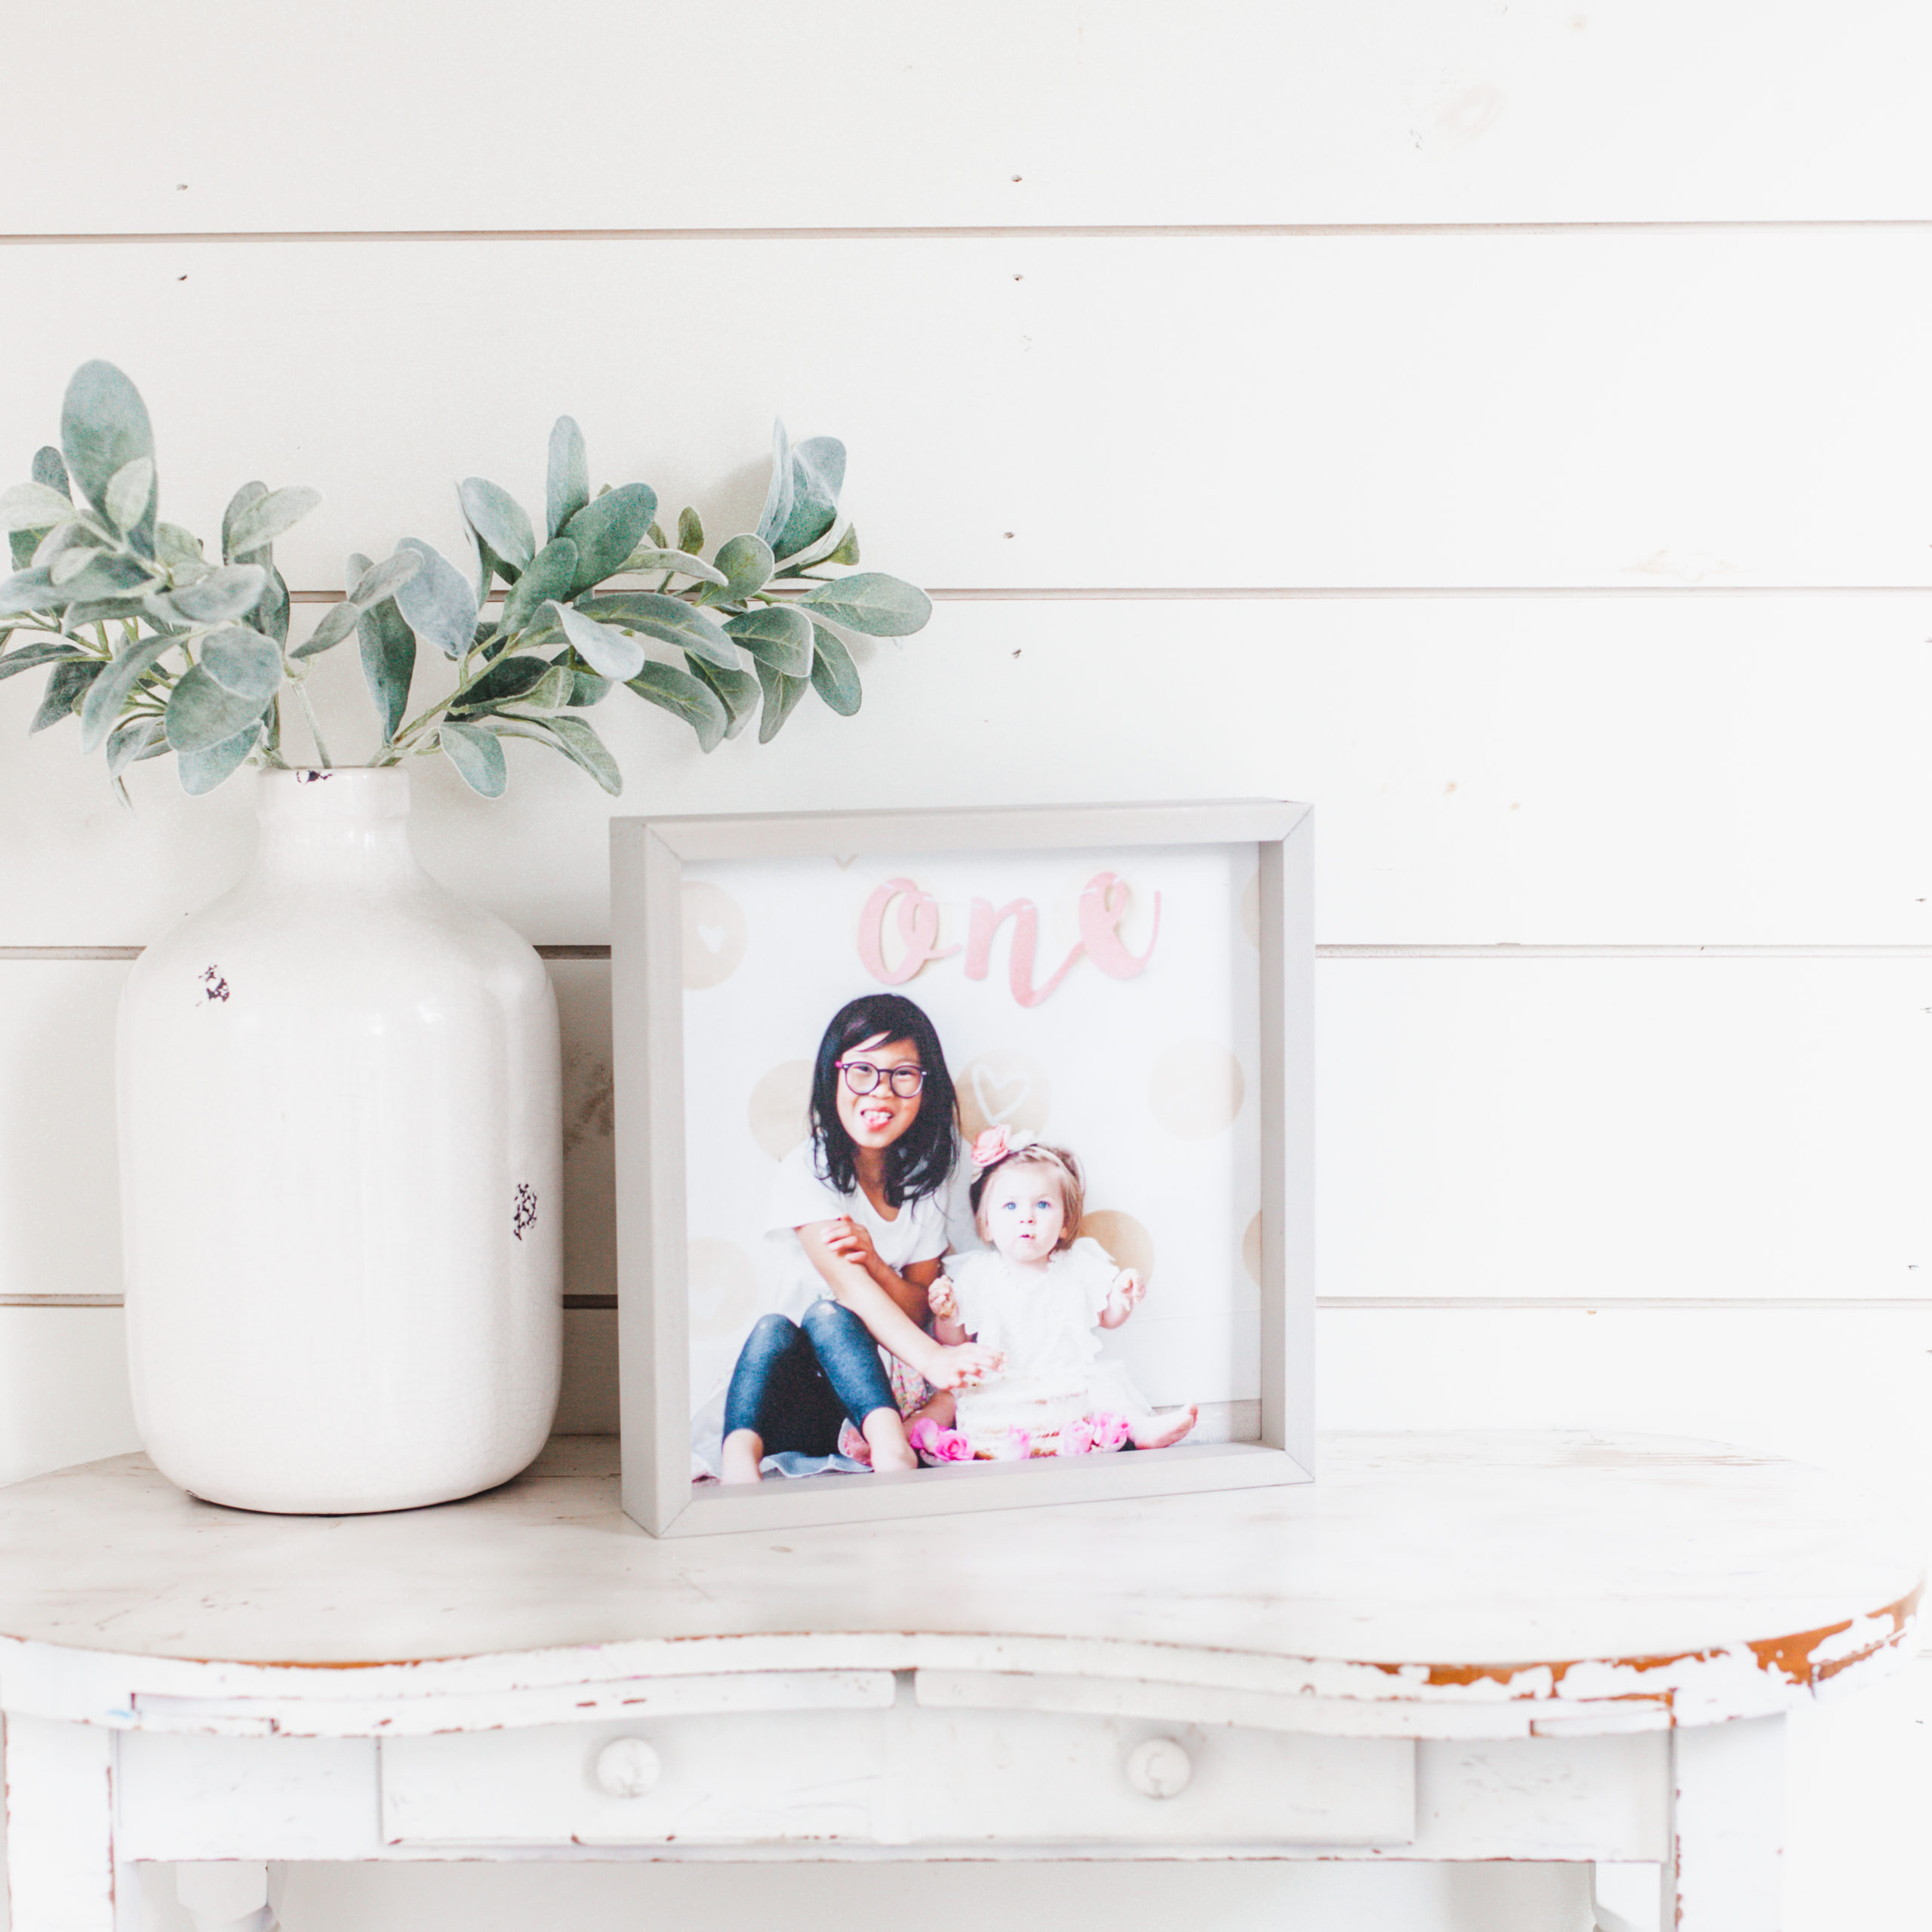 11x14 PhotoCrates | Starting at $32 ($99)